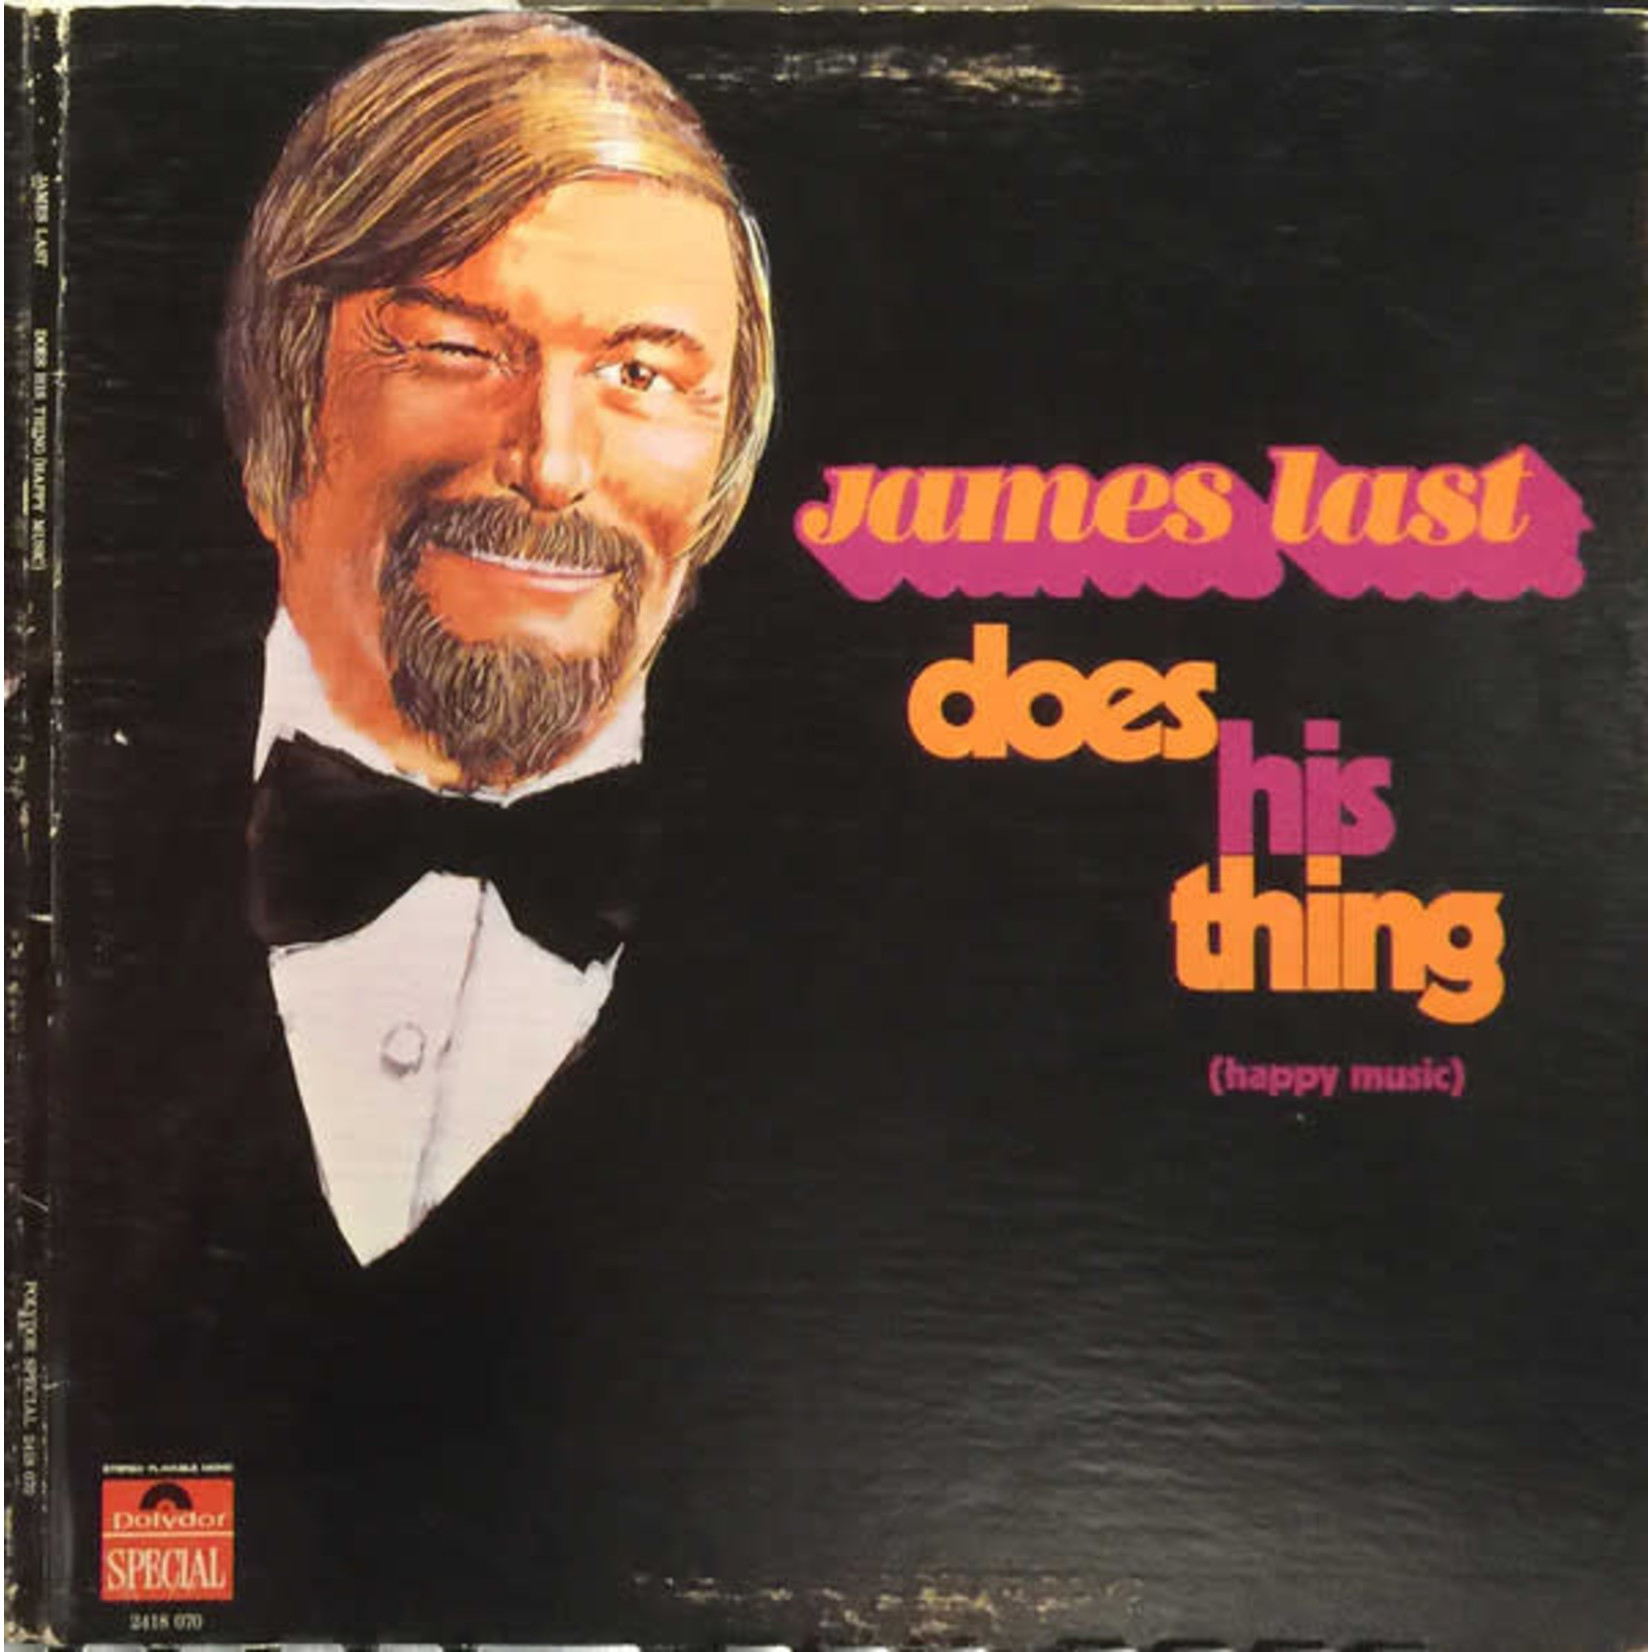 The James Last Band James Last – Does His Thing (Happy Music) (VG, 1970, LP, Polydor – 2418 070)